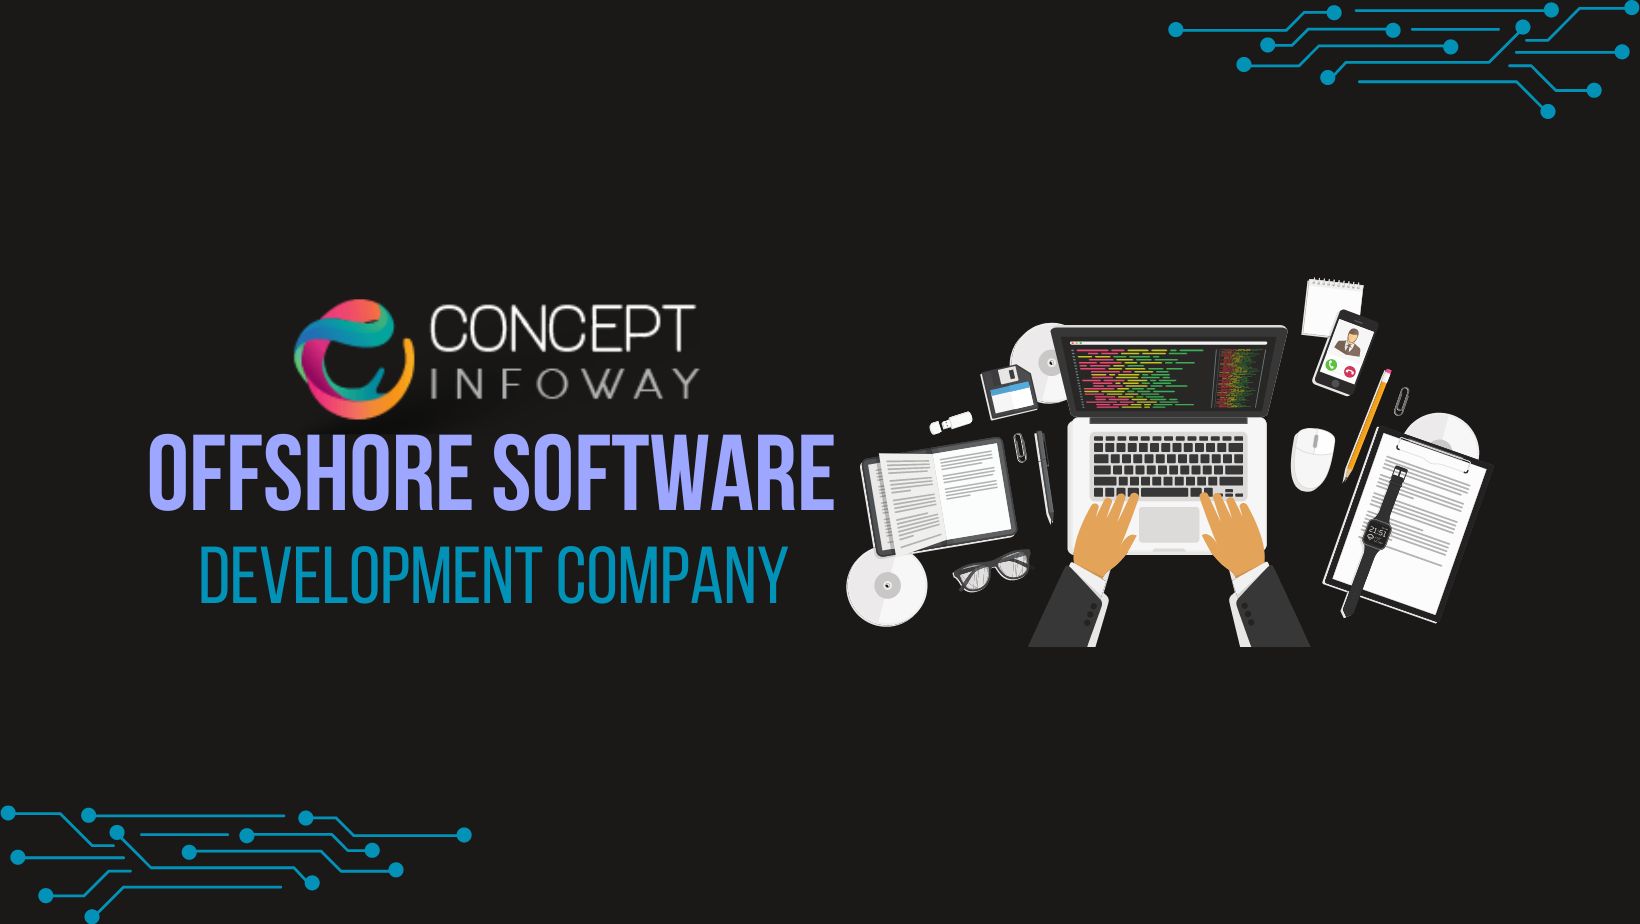 Offshore software Development Company - Concept Infoway